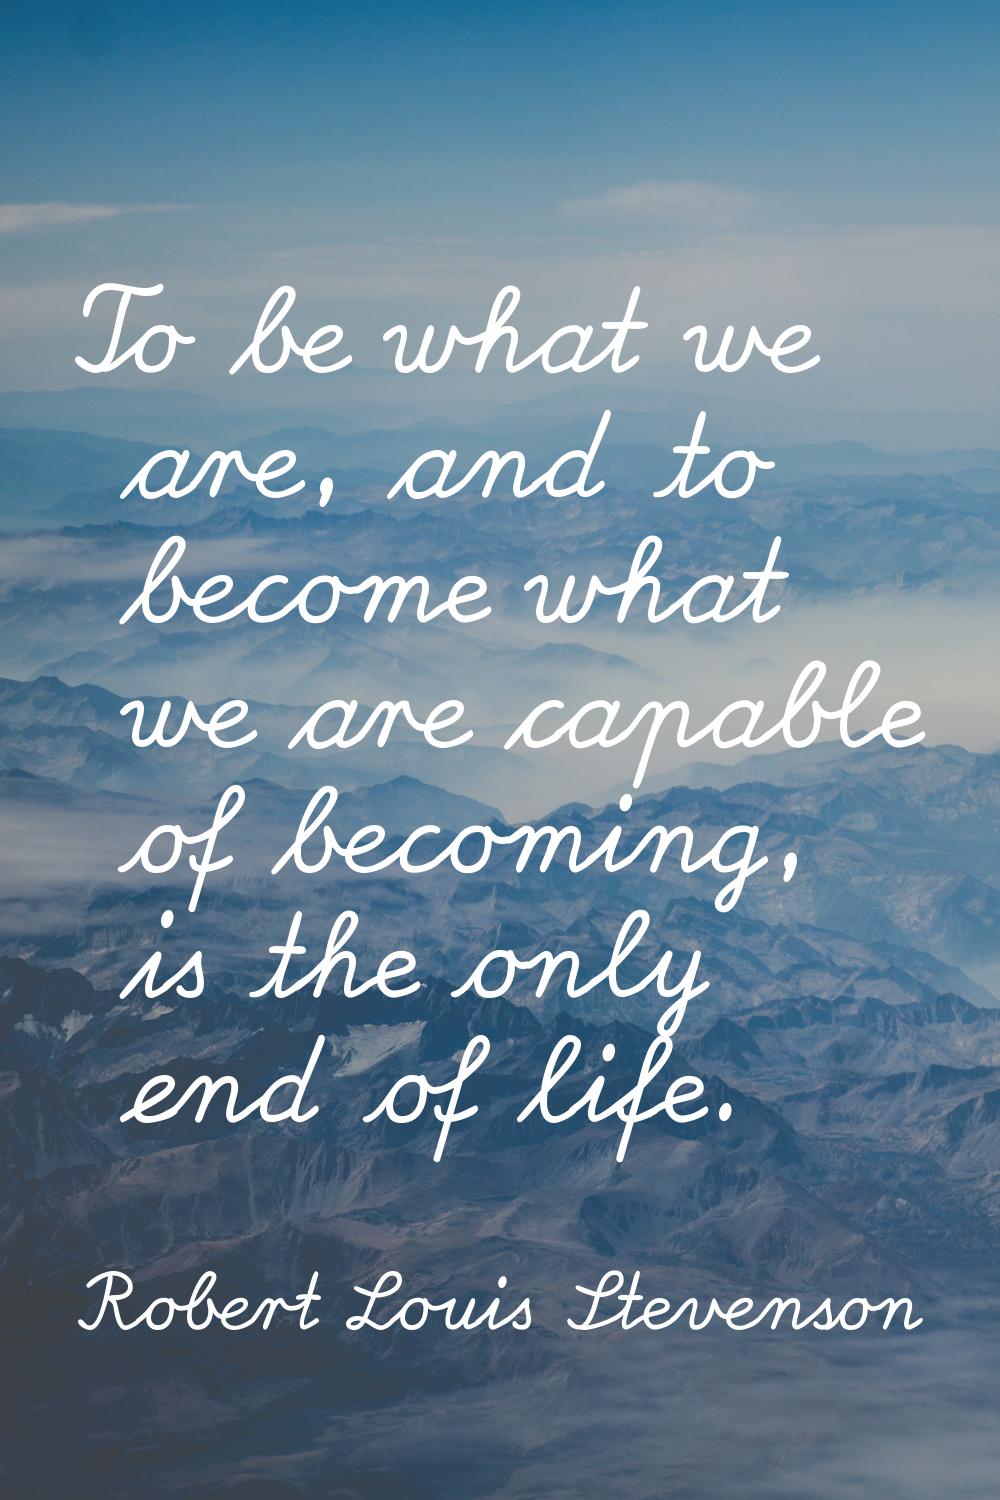 To be what we are, and to become what we are capable of becoming, is the only end of life.